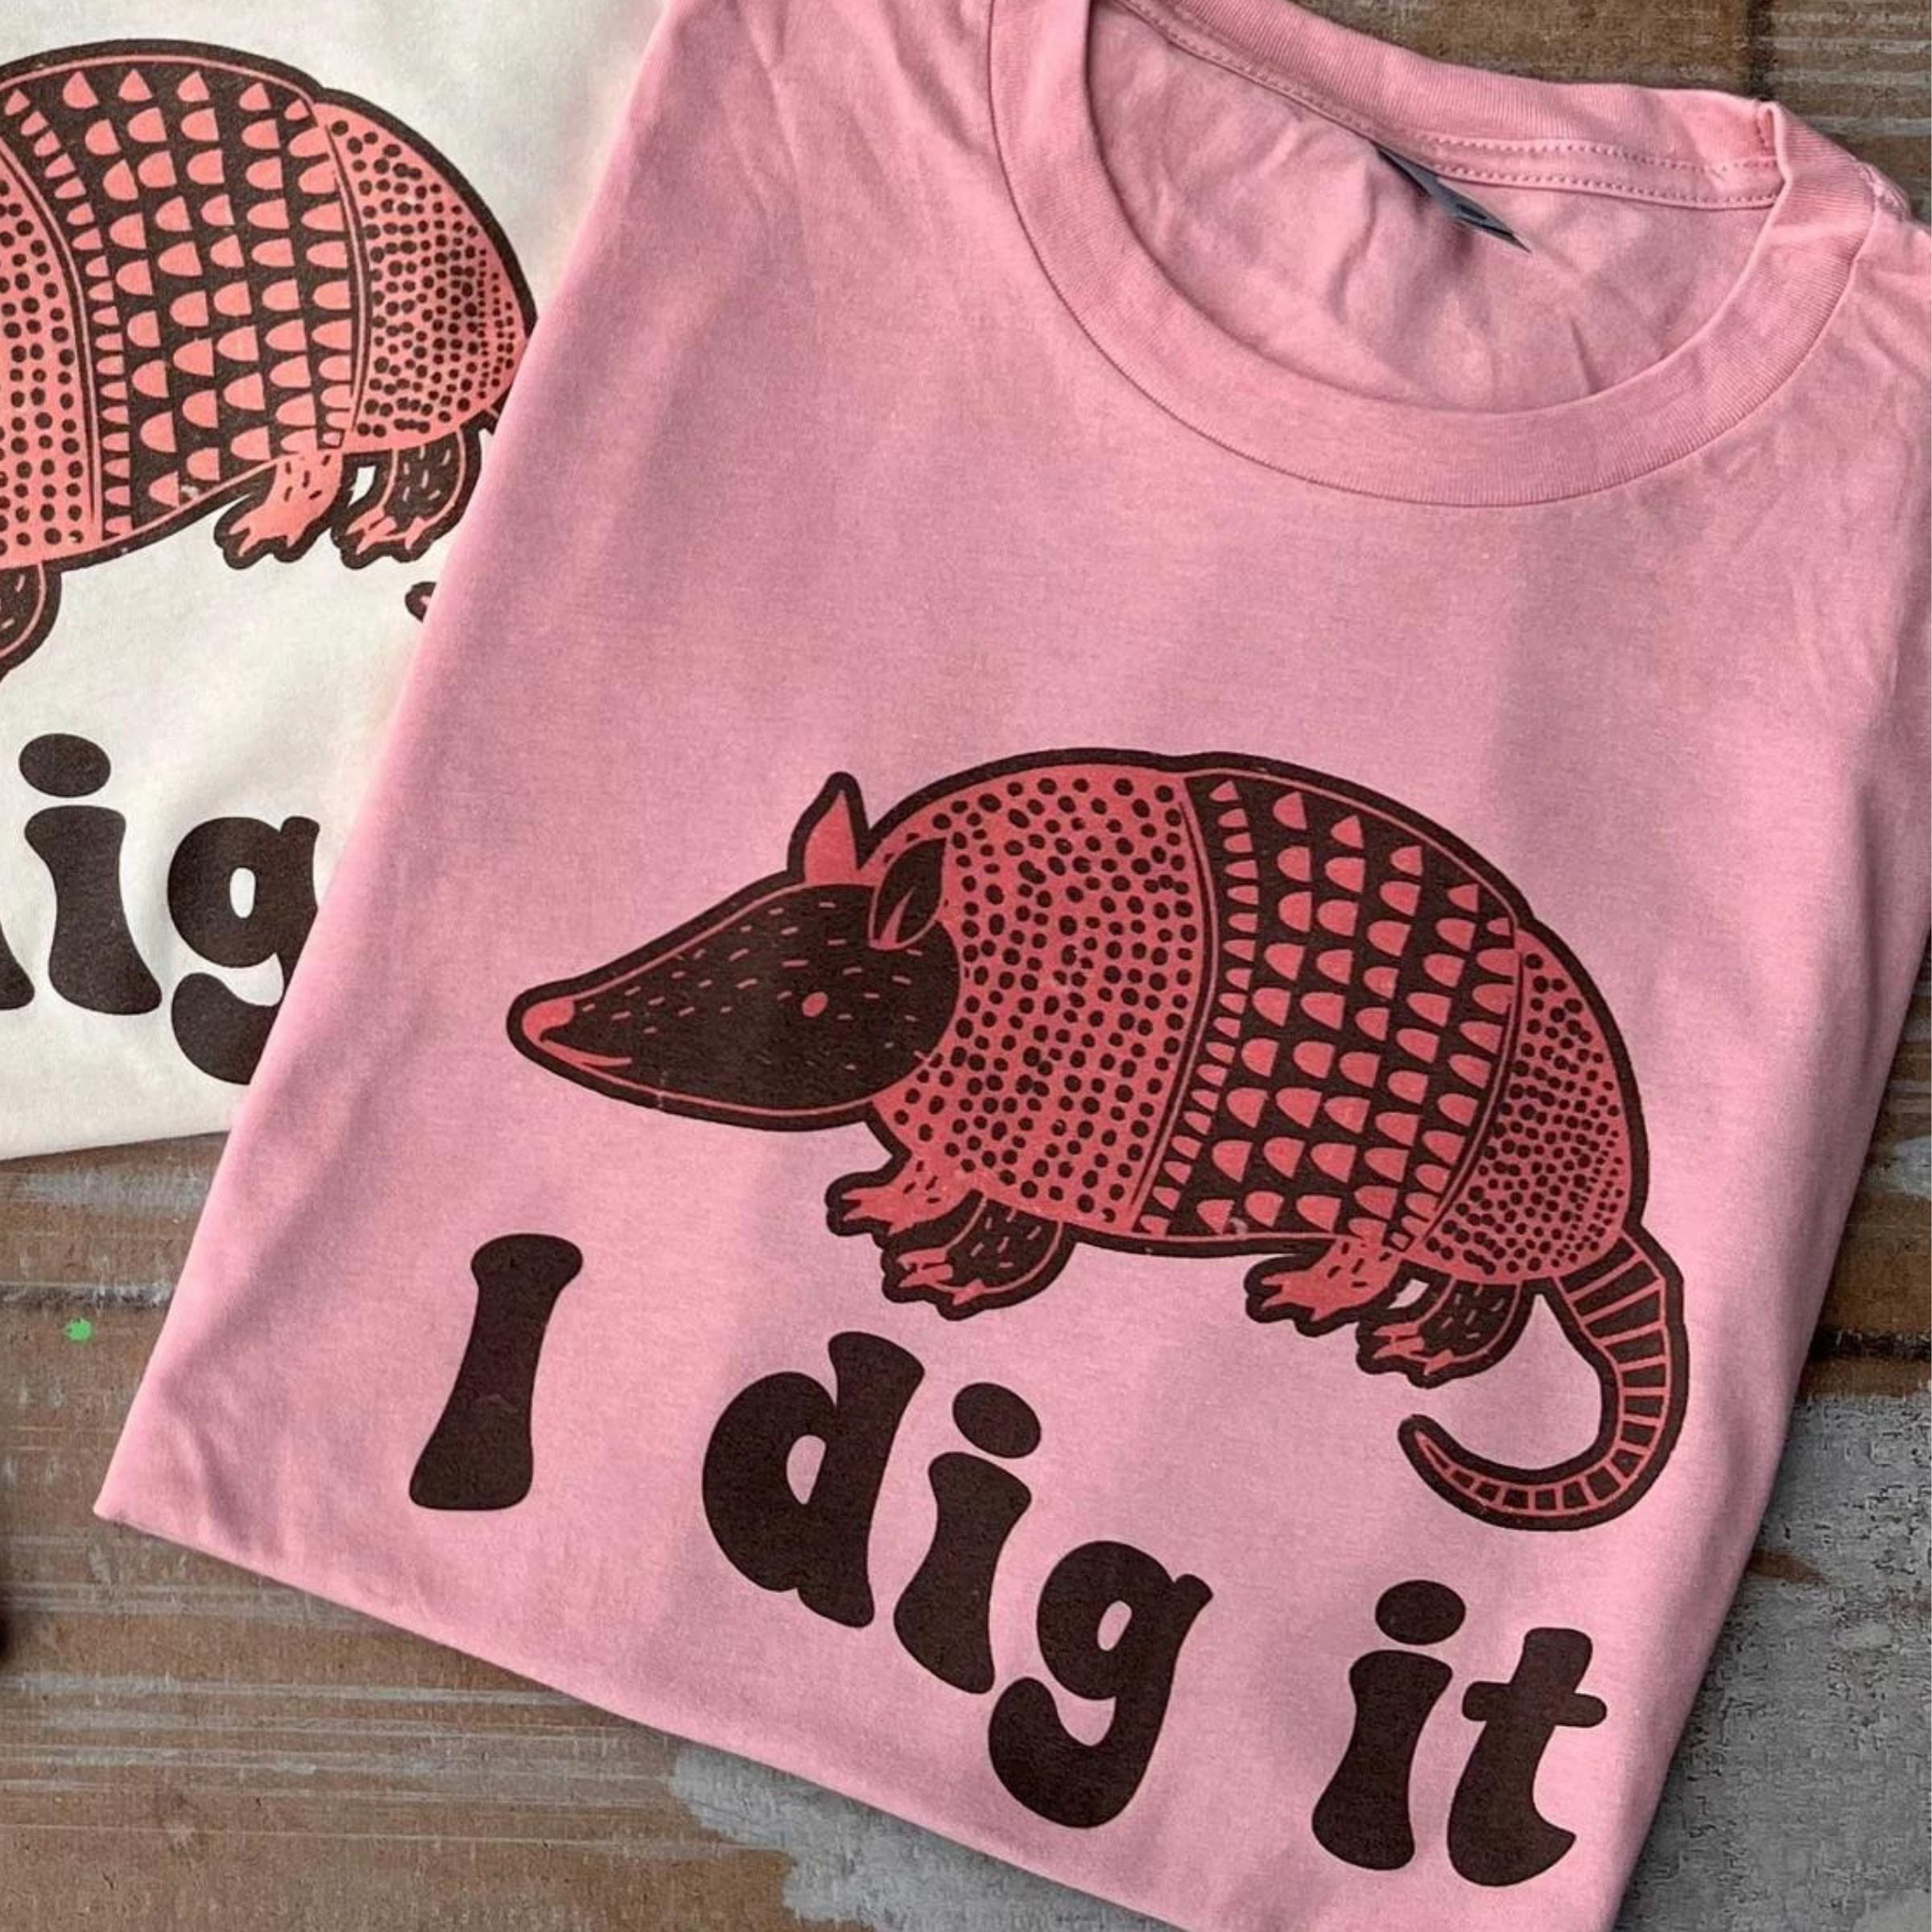 Online Exclusive | I Dig It Armadillo Graphic Tee in Desert Rose Pink - Giddy Up Glamour Boutique